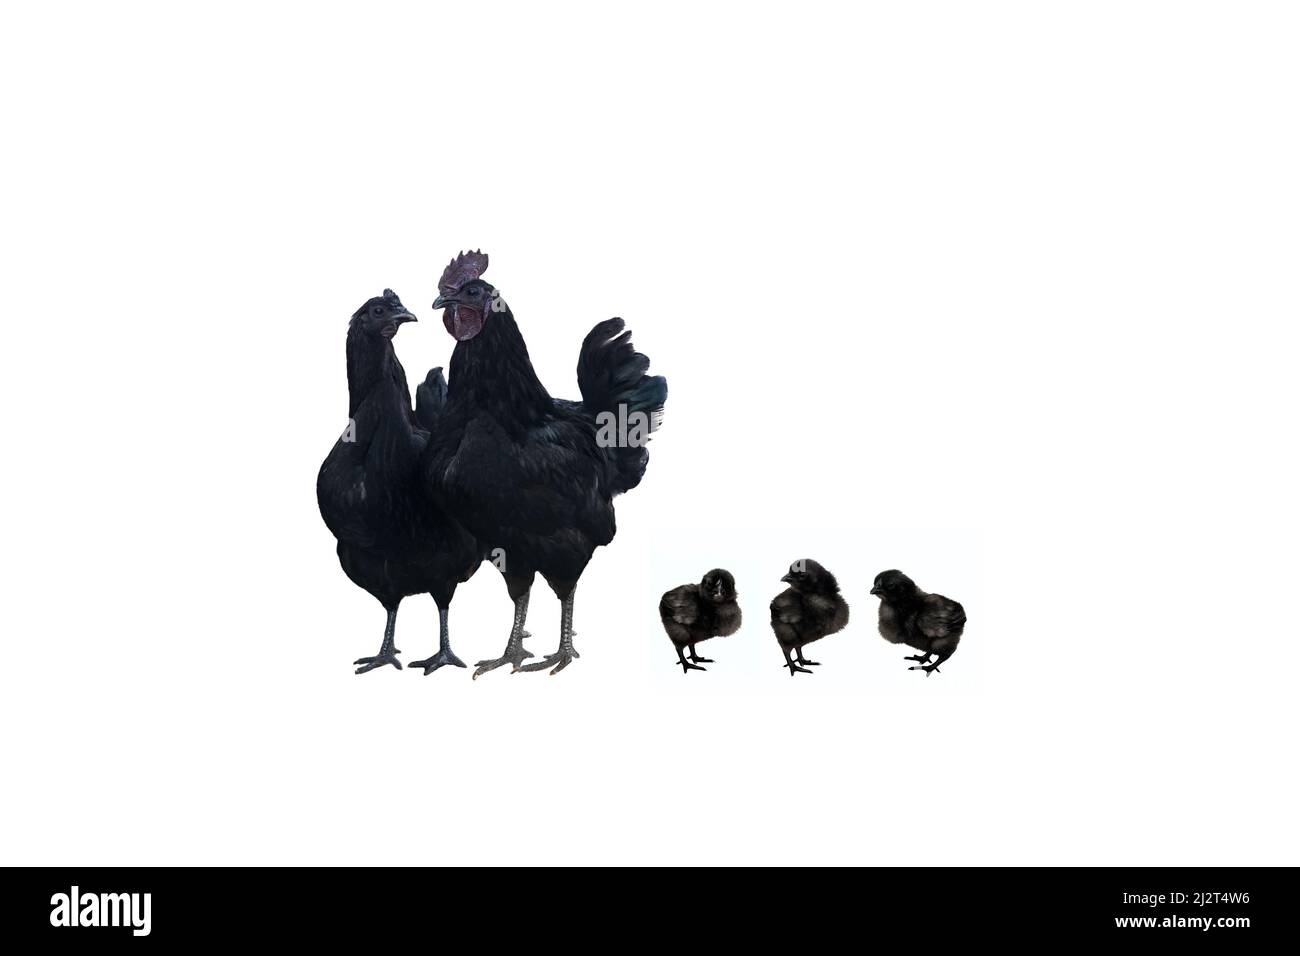 Family of black hens of the dongxiang breed on a white background Stock Photo